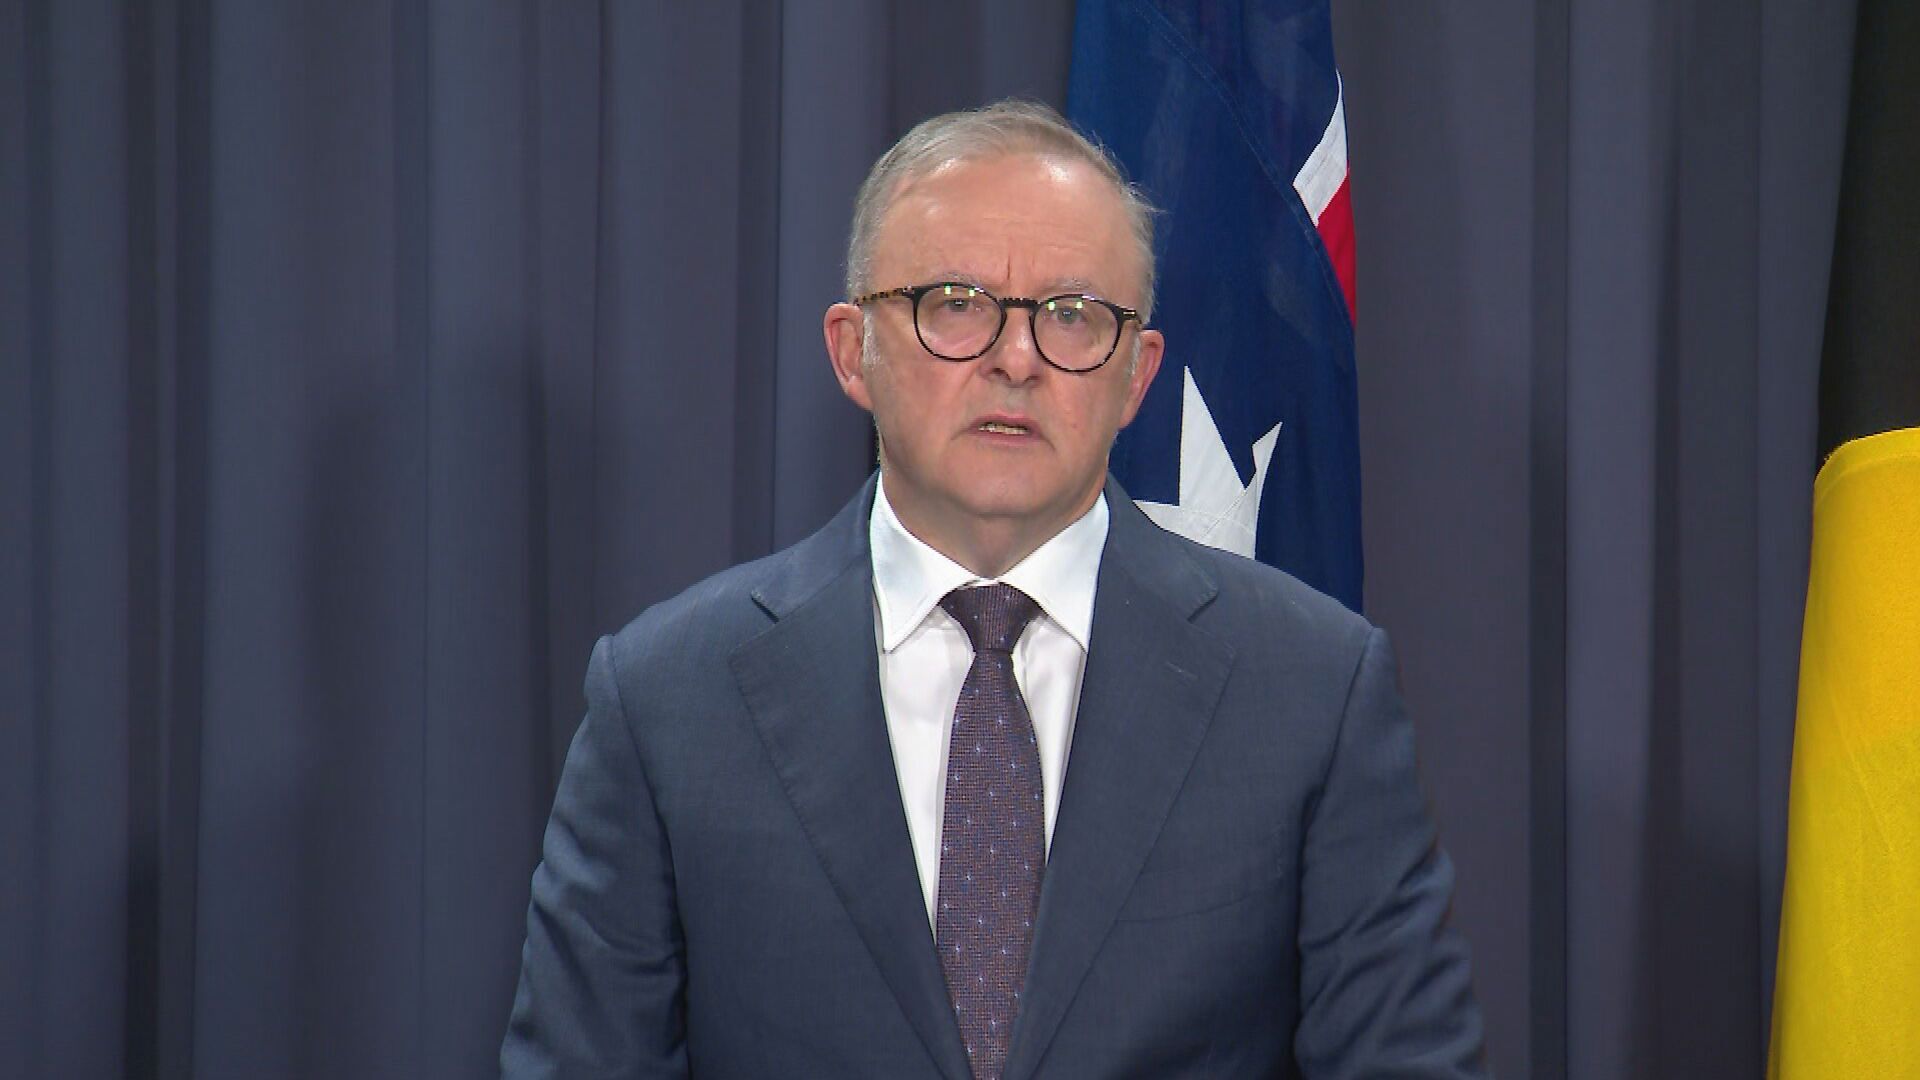 prime minister says shopping centre attack 'horrific act of violence'